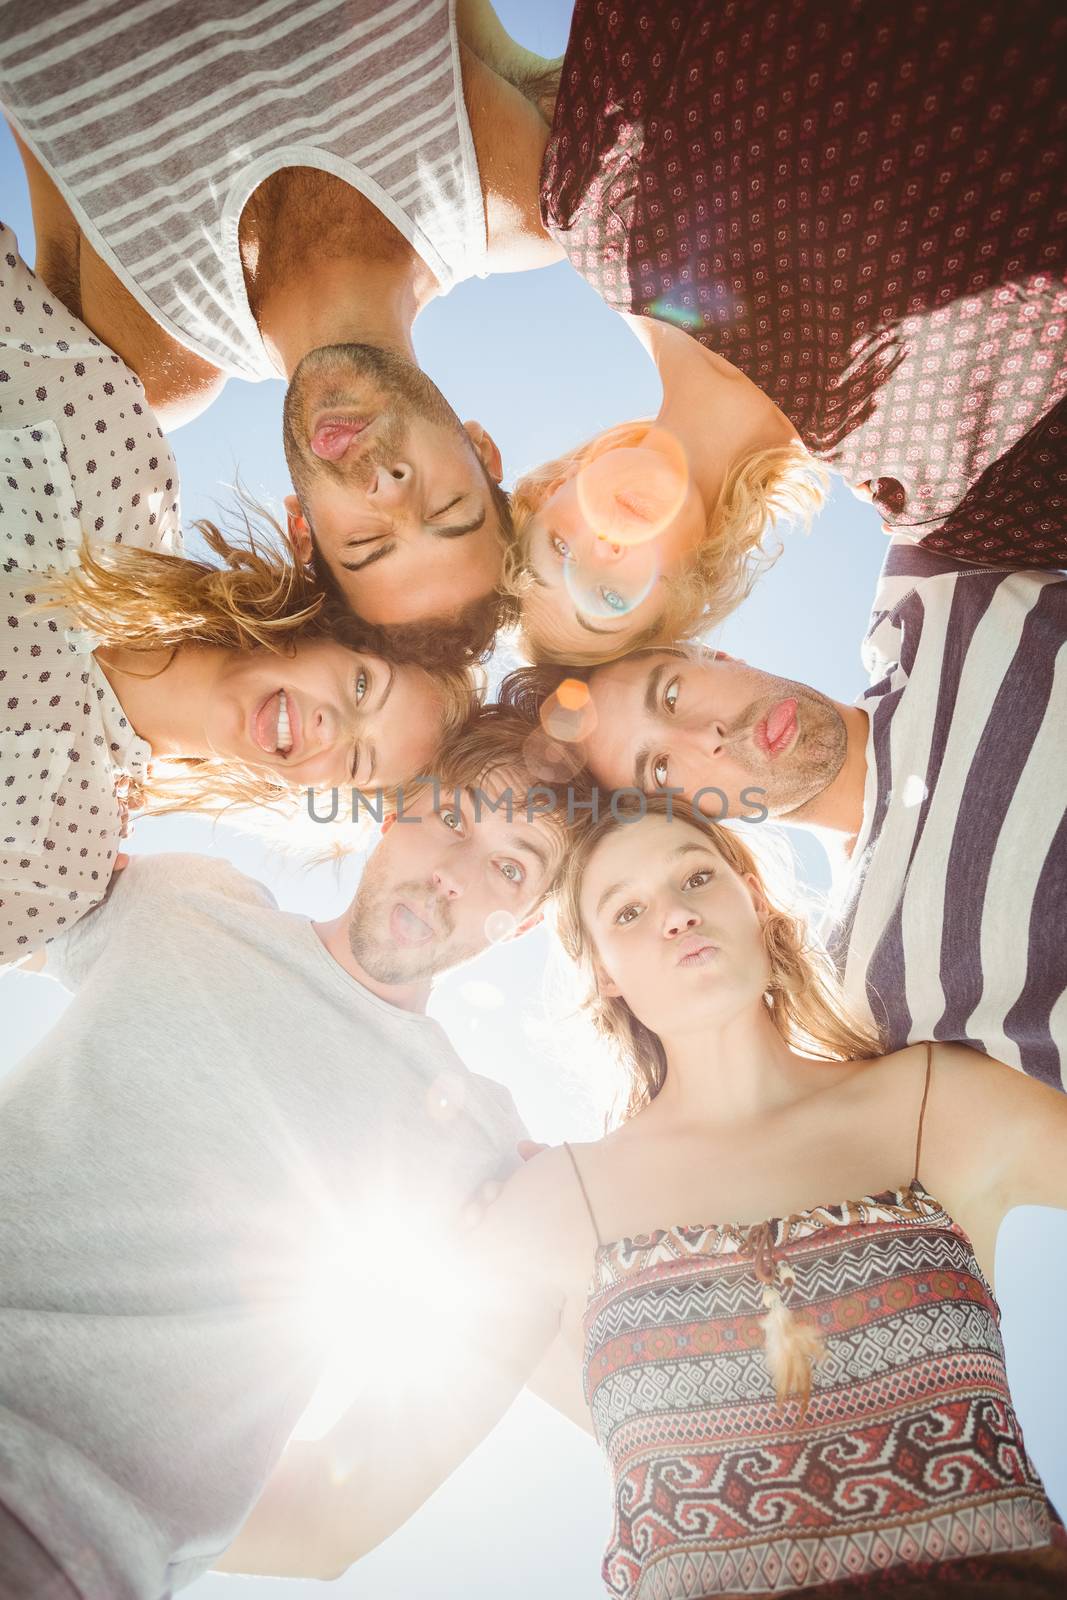 Group of friends forming a huddle by Wavebreakmedia